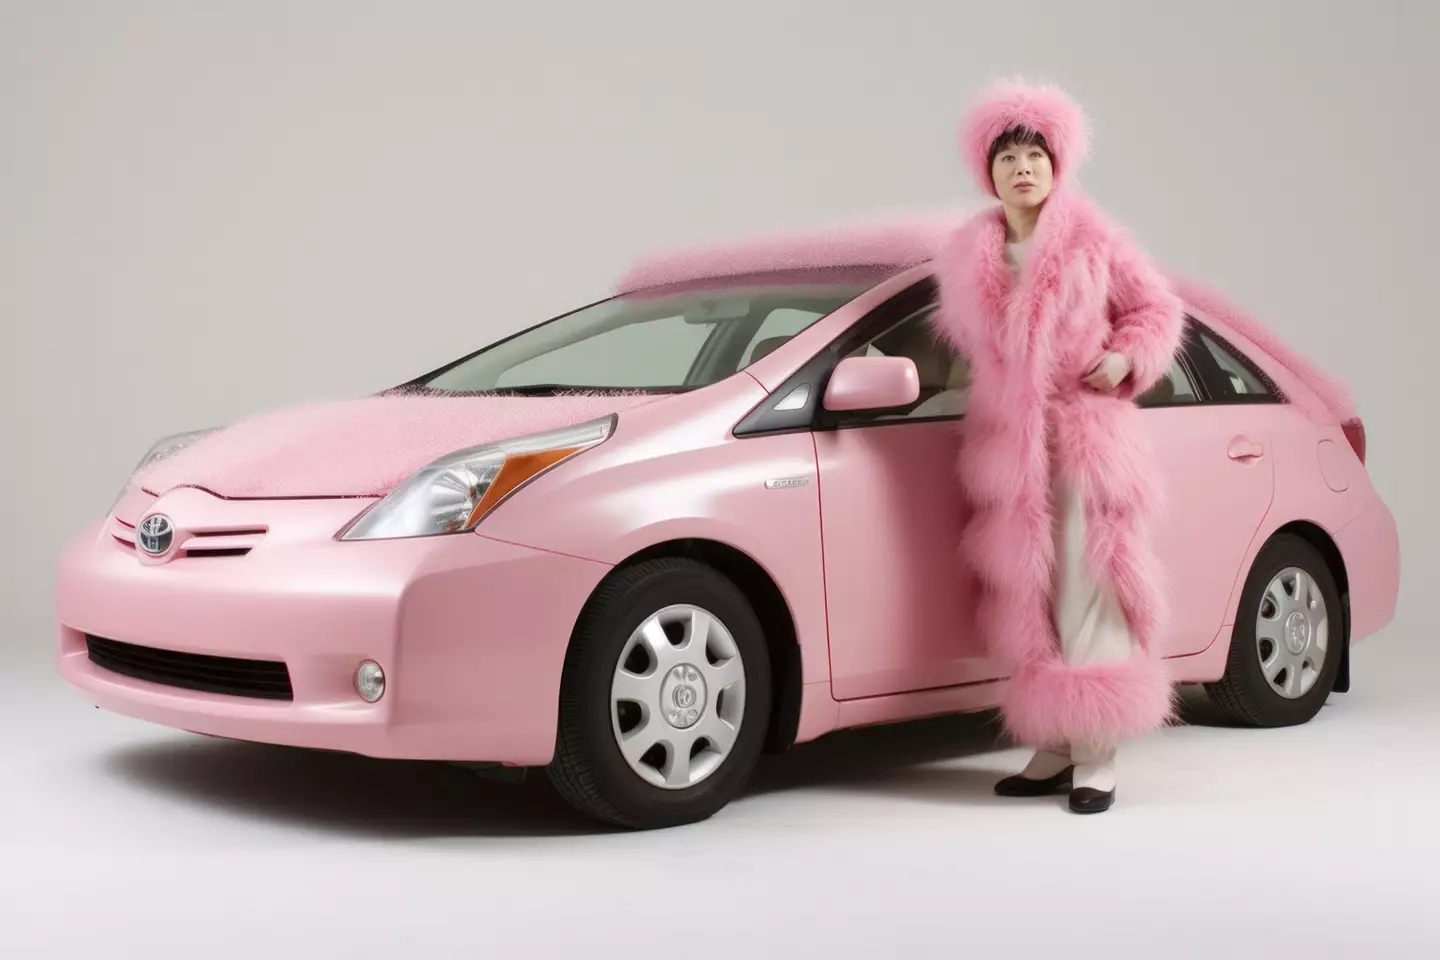 Why is the Toyota Prius pink and fluffy?